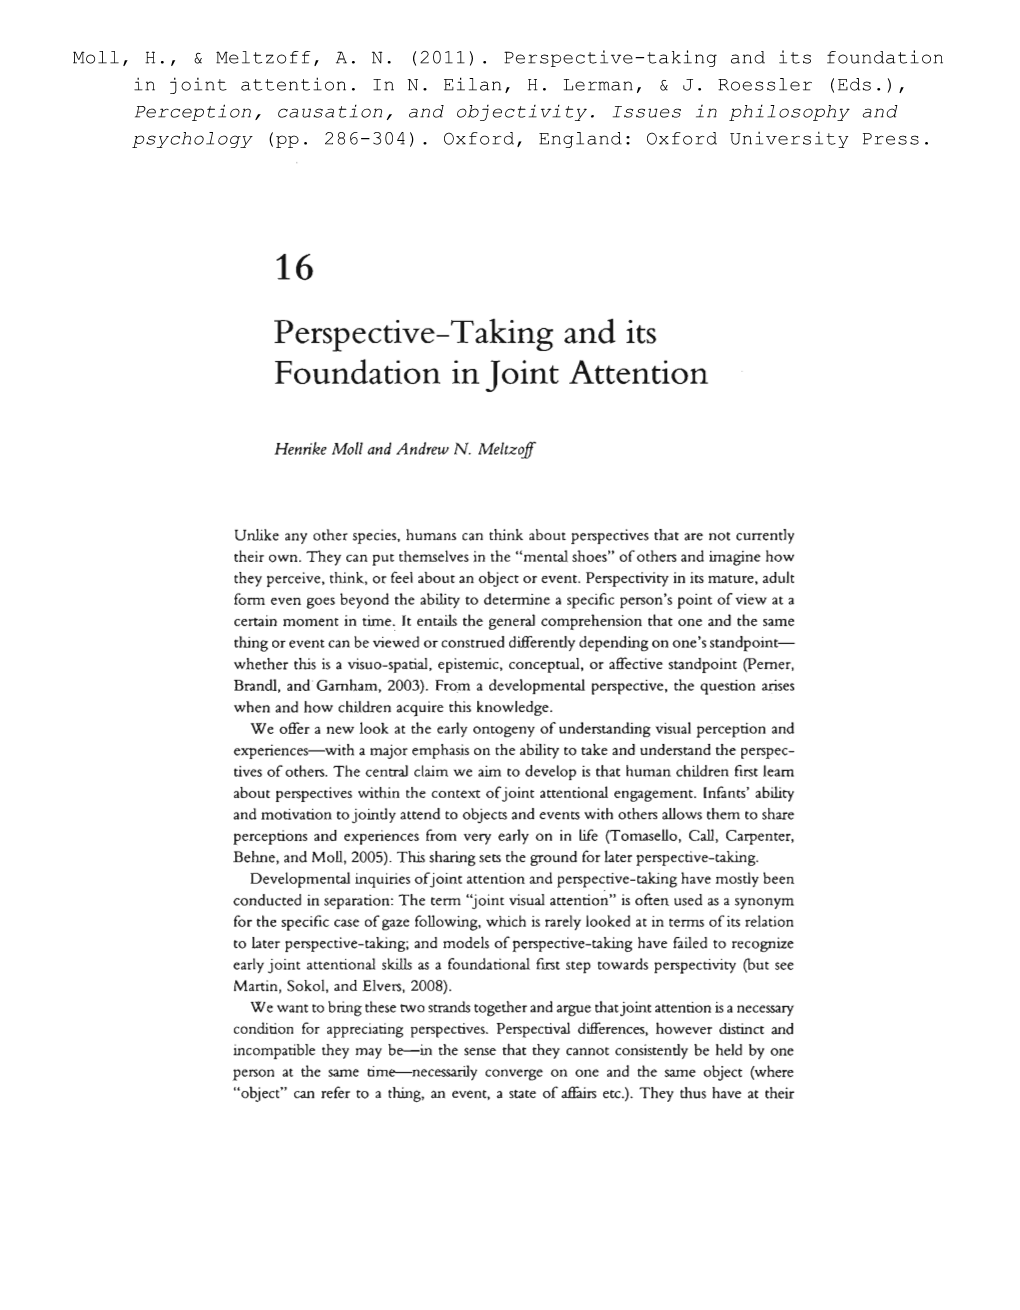 Perspective-Taking and Its Foundation Injoint Attention